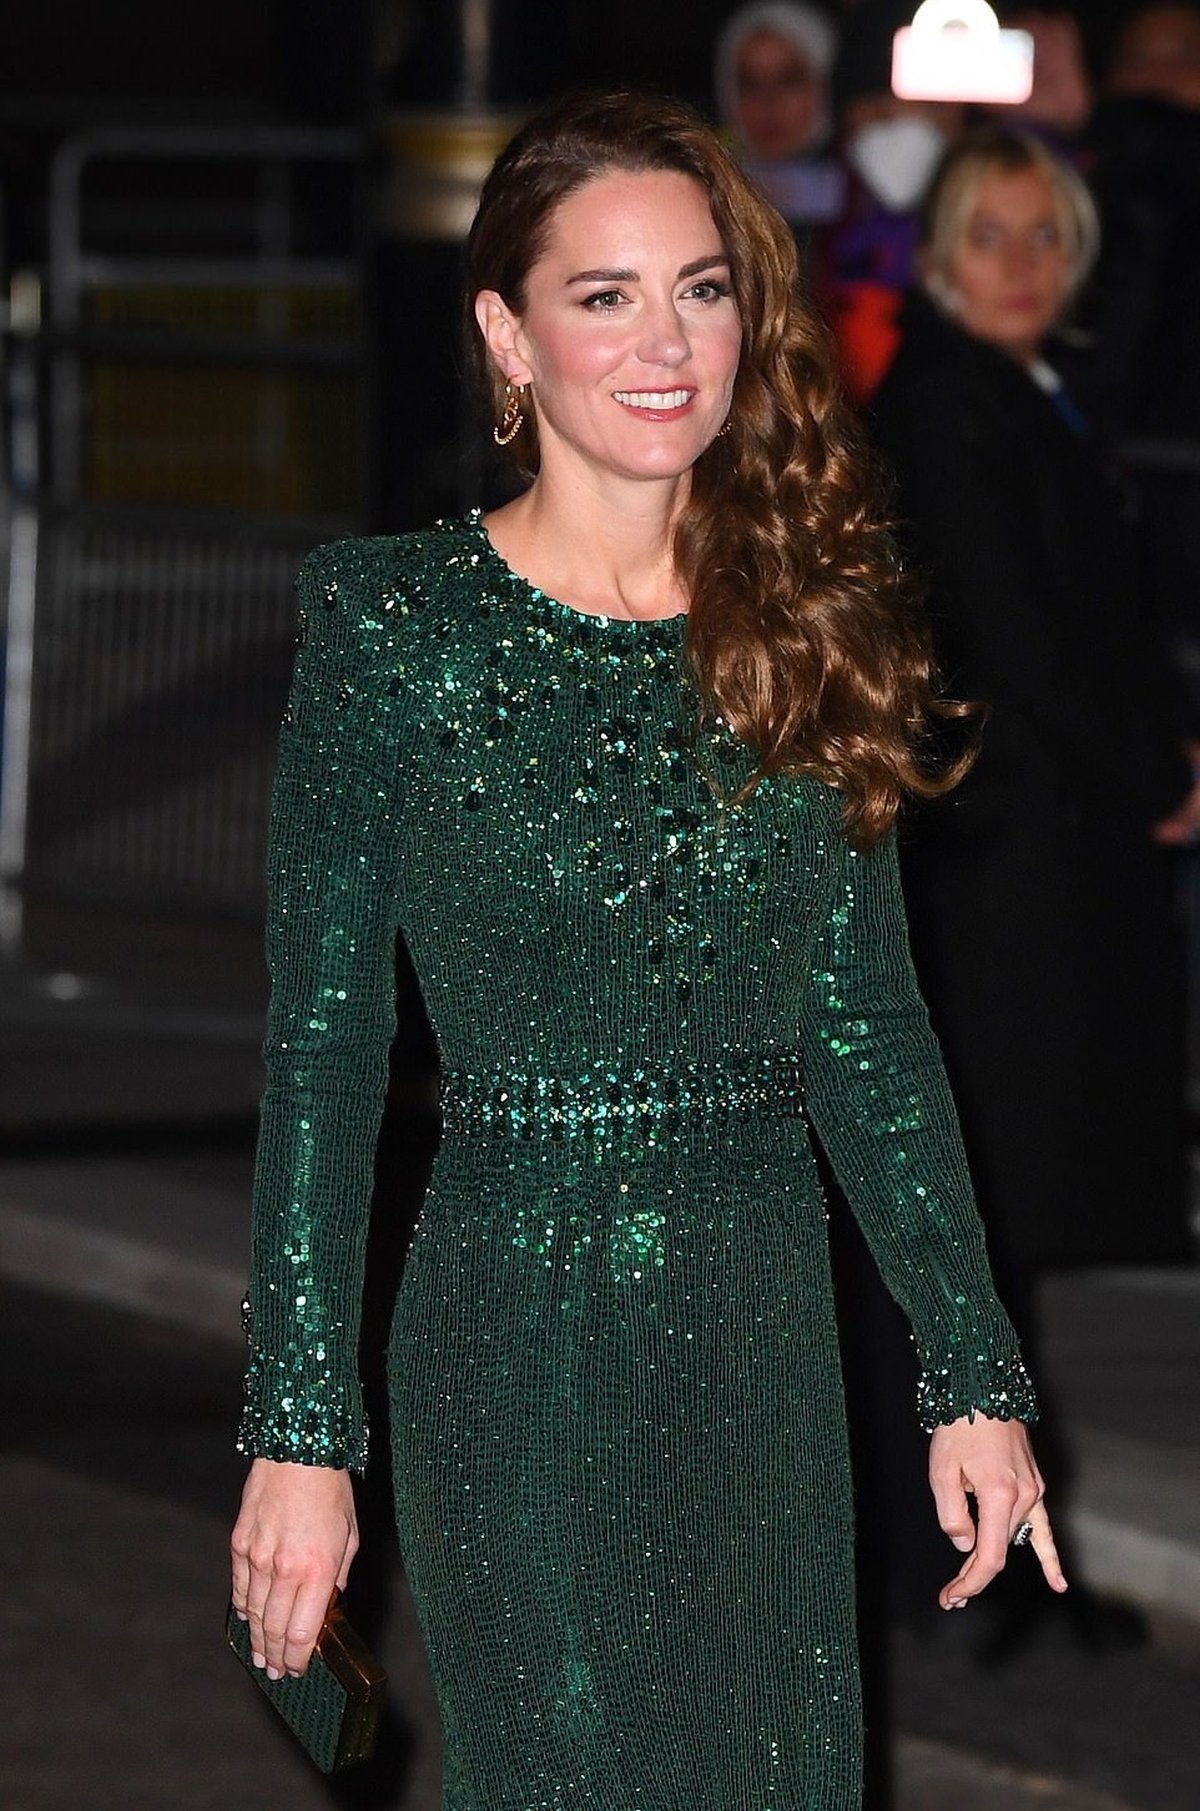 Duchess Catherine in an emerald green dress at a London event